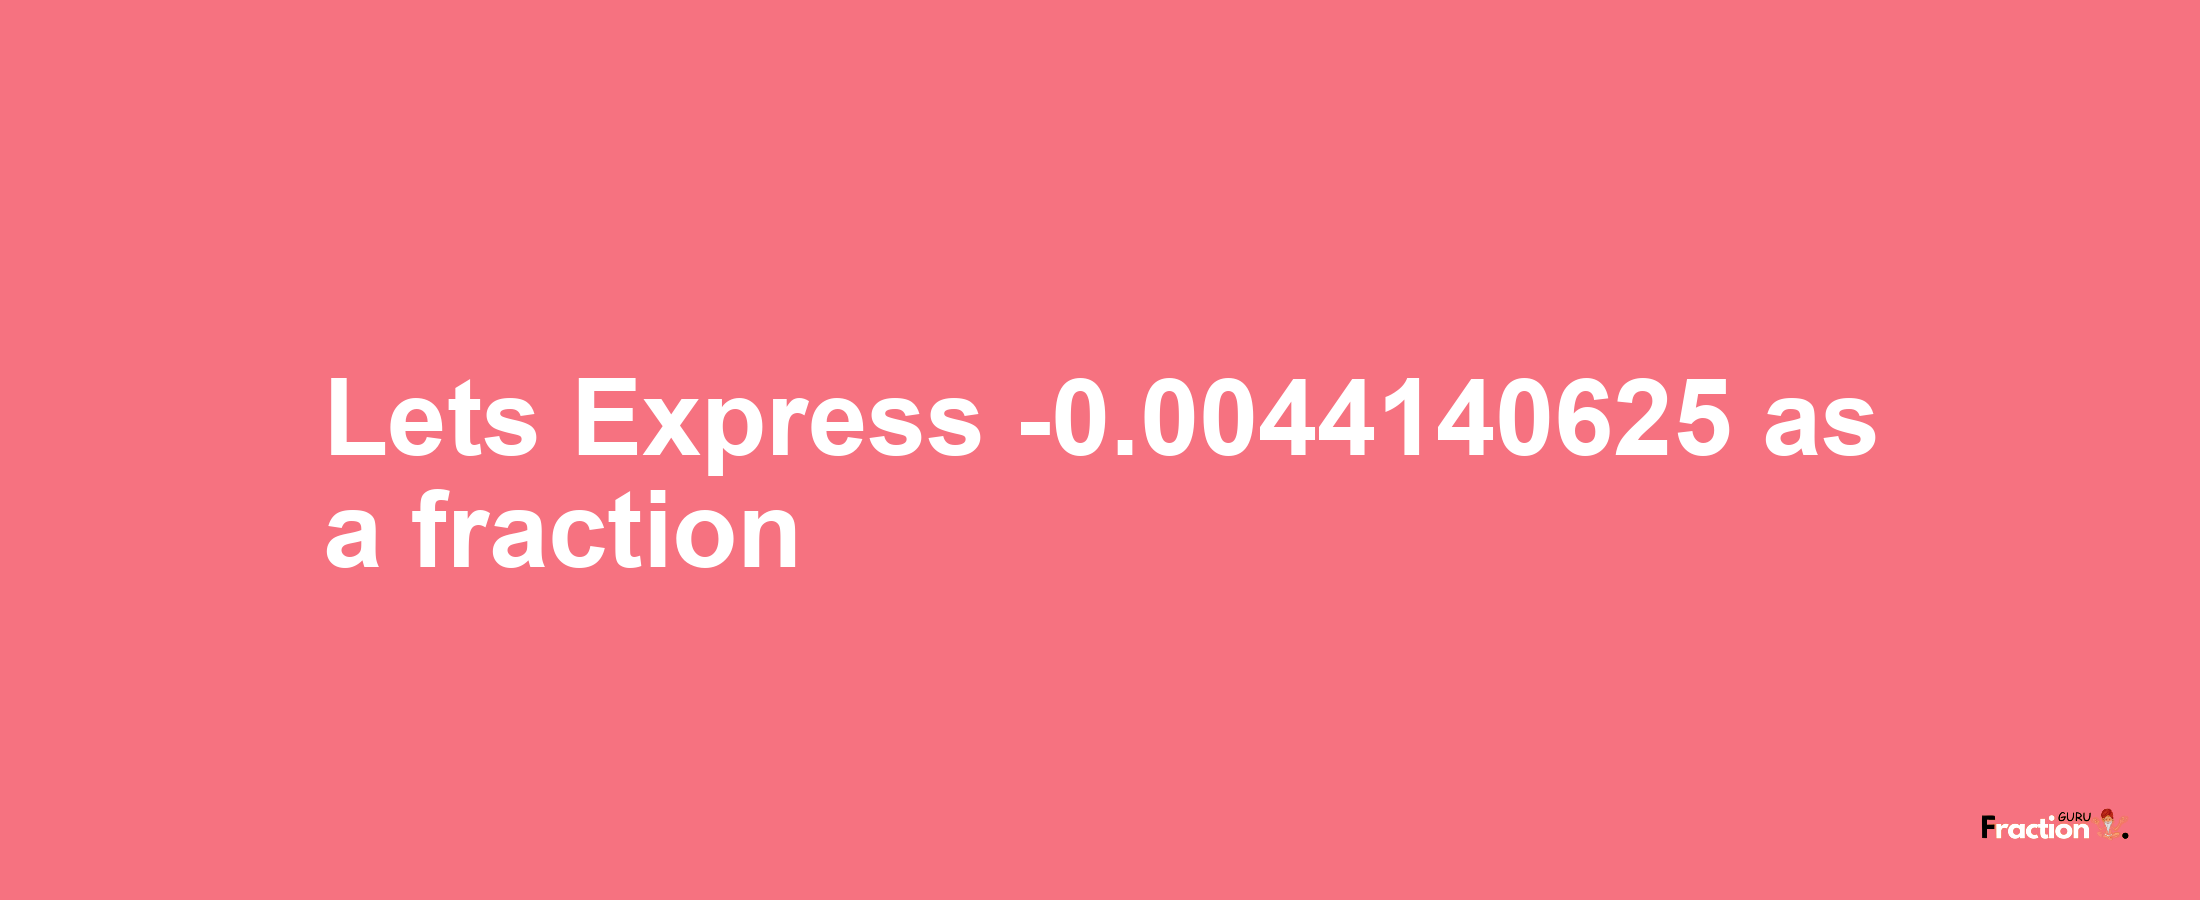 Lets Express -0.0044140625 as afraction